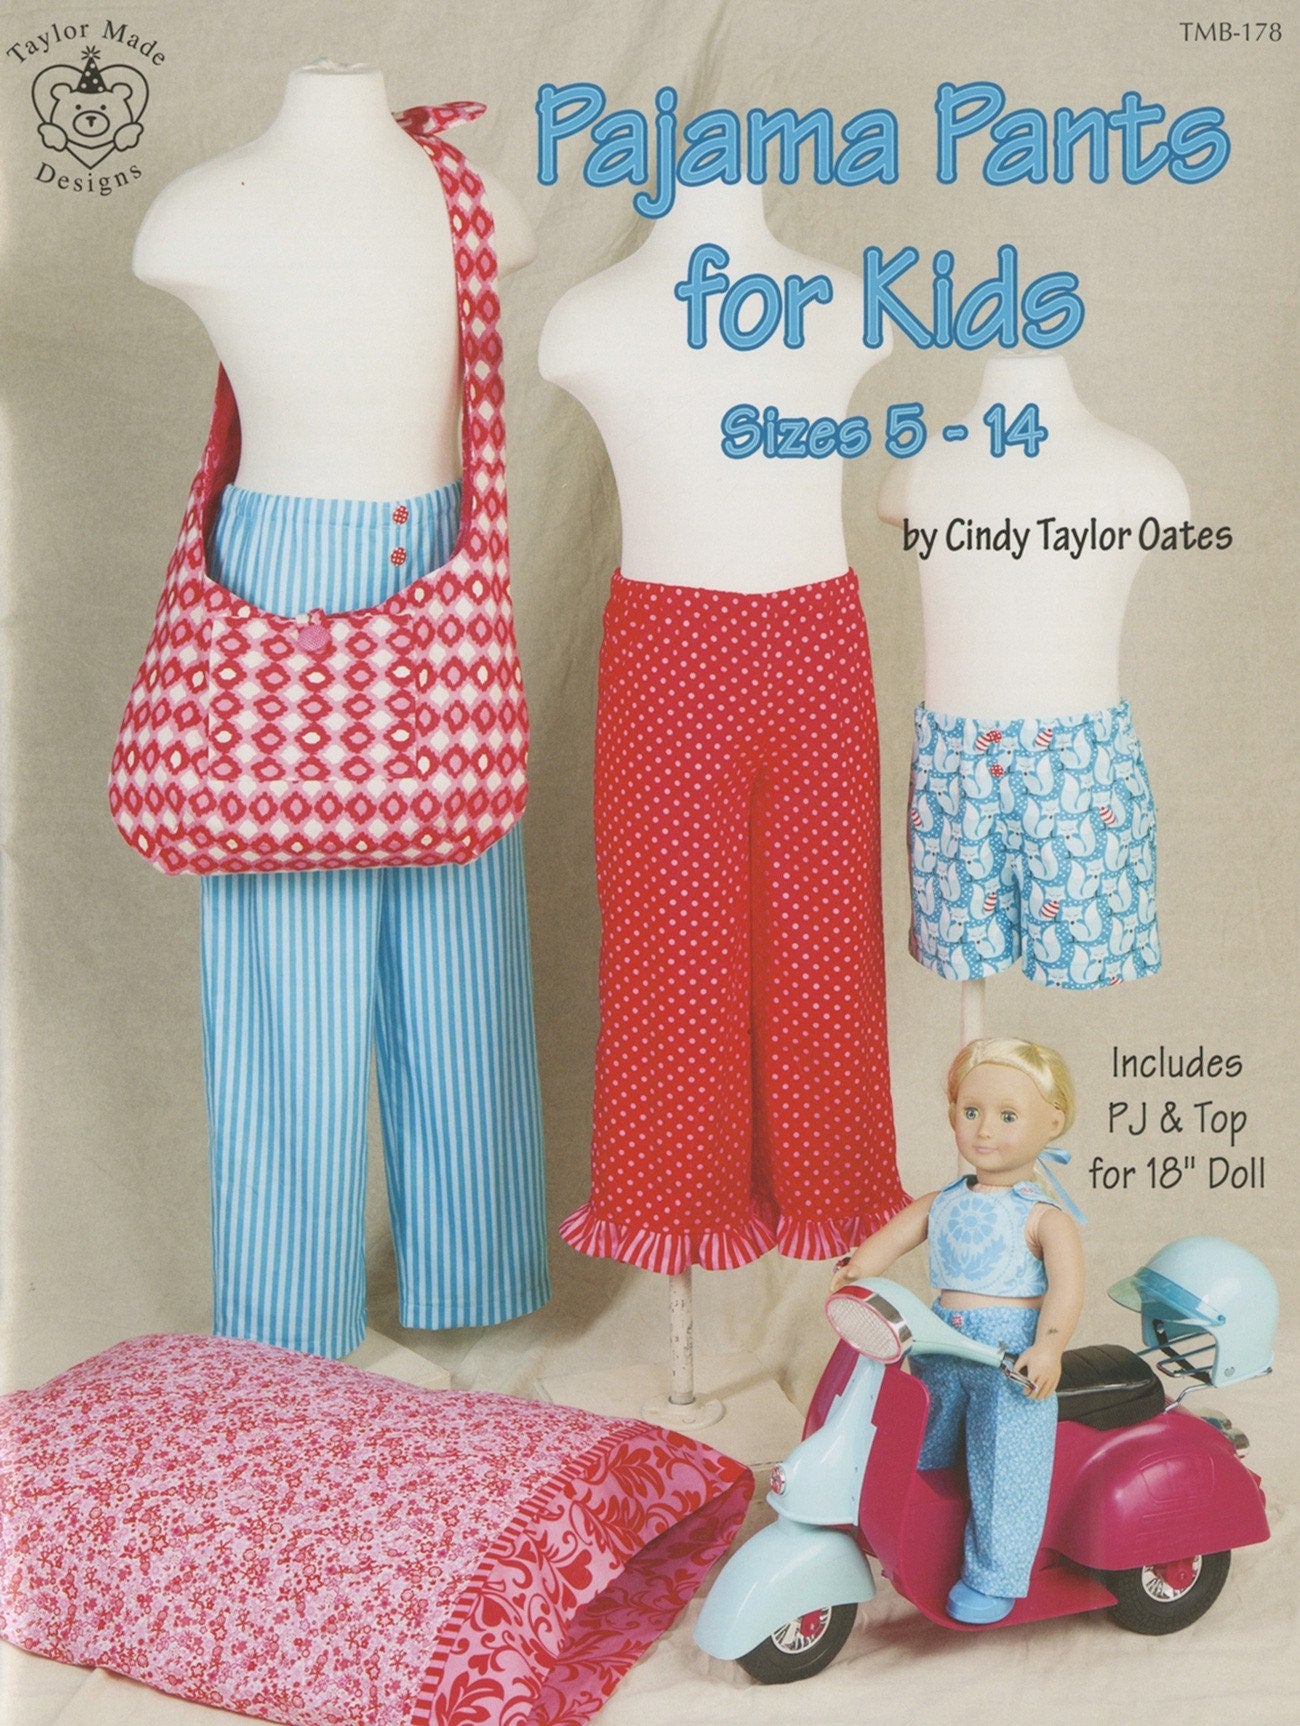 Pajama Pants For Kids Sizes 5 - 14 Sewing Pattern Book by Cindy Taylor Oates of Taylor Made Designs